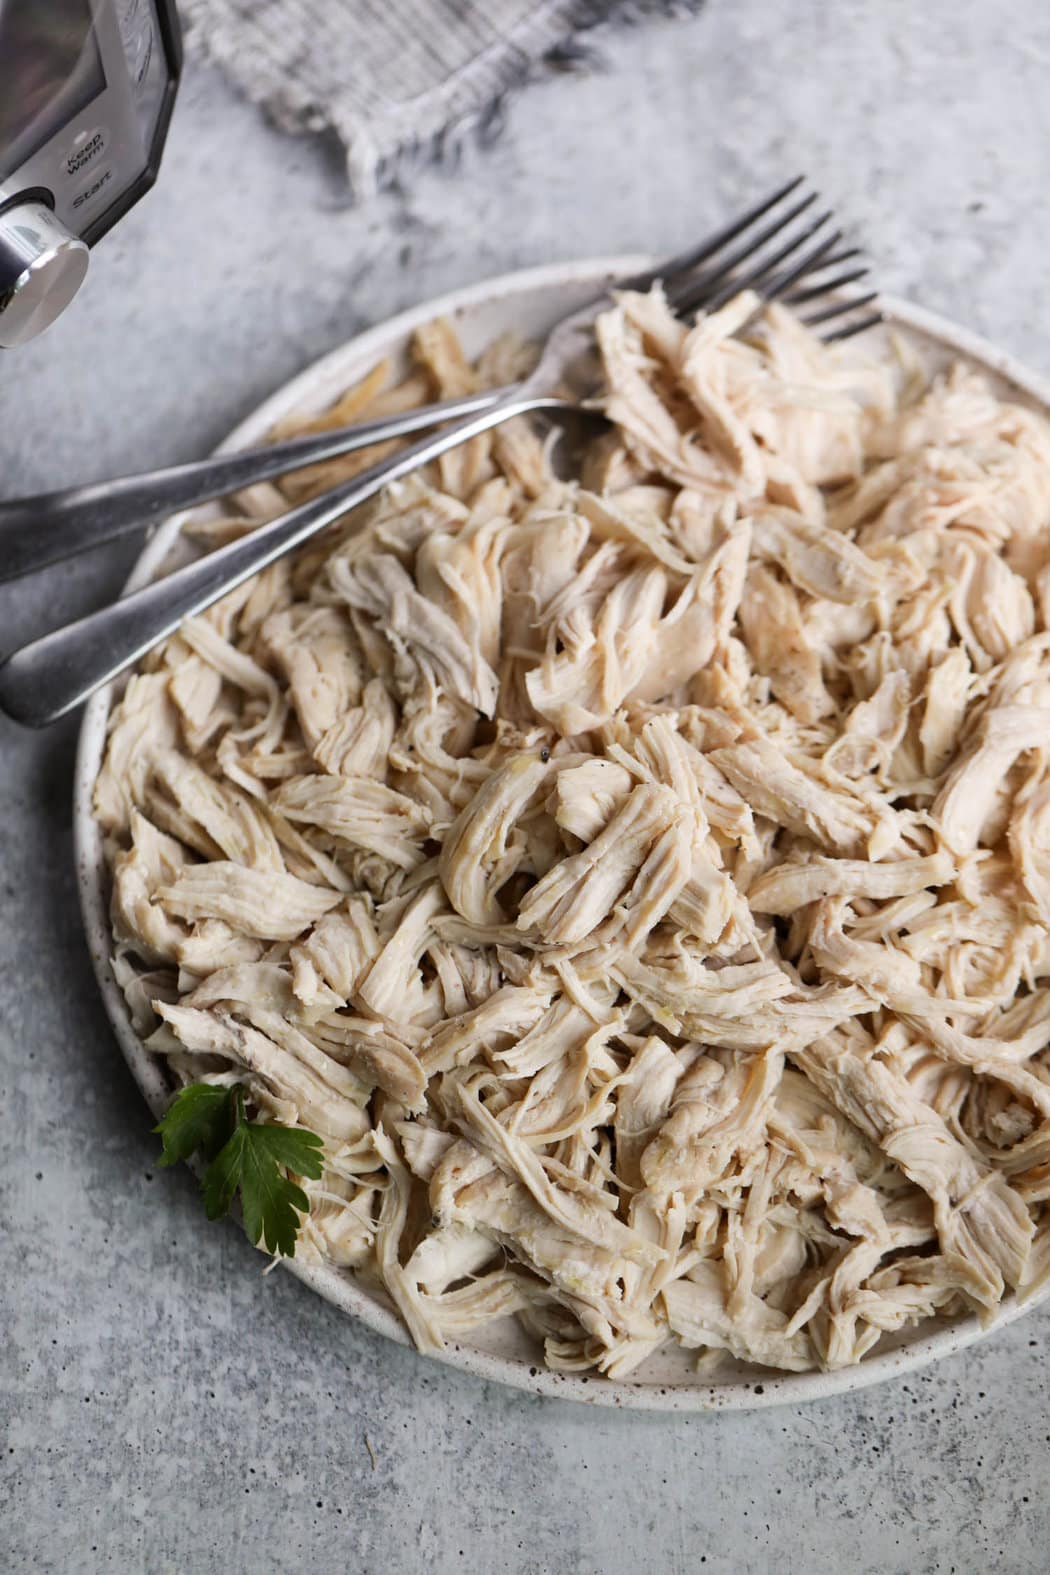 https://therealfooddietitians.com/wp-content/uploads/2023/07/Instant-Pot-Shredded-Chicken-15-of-16.jpg